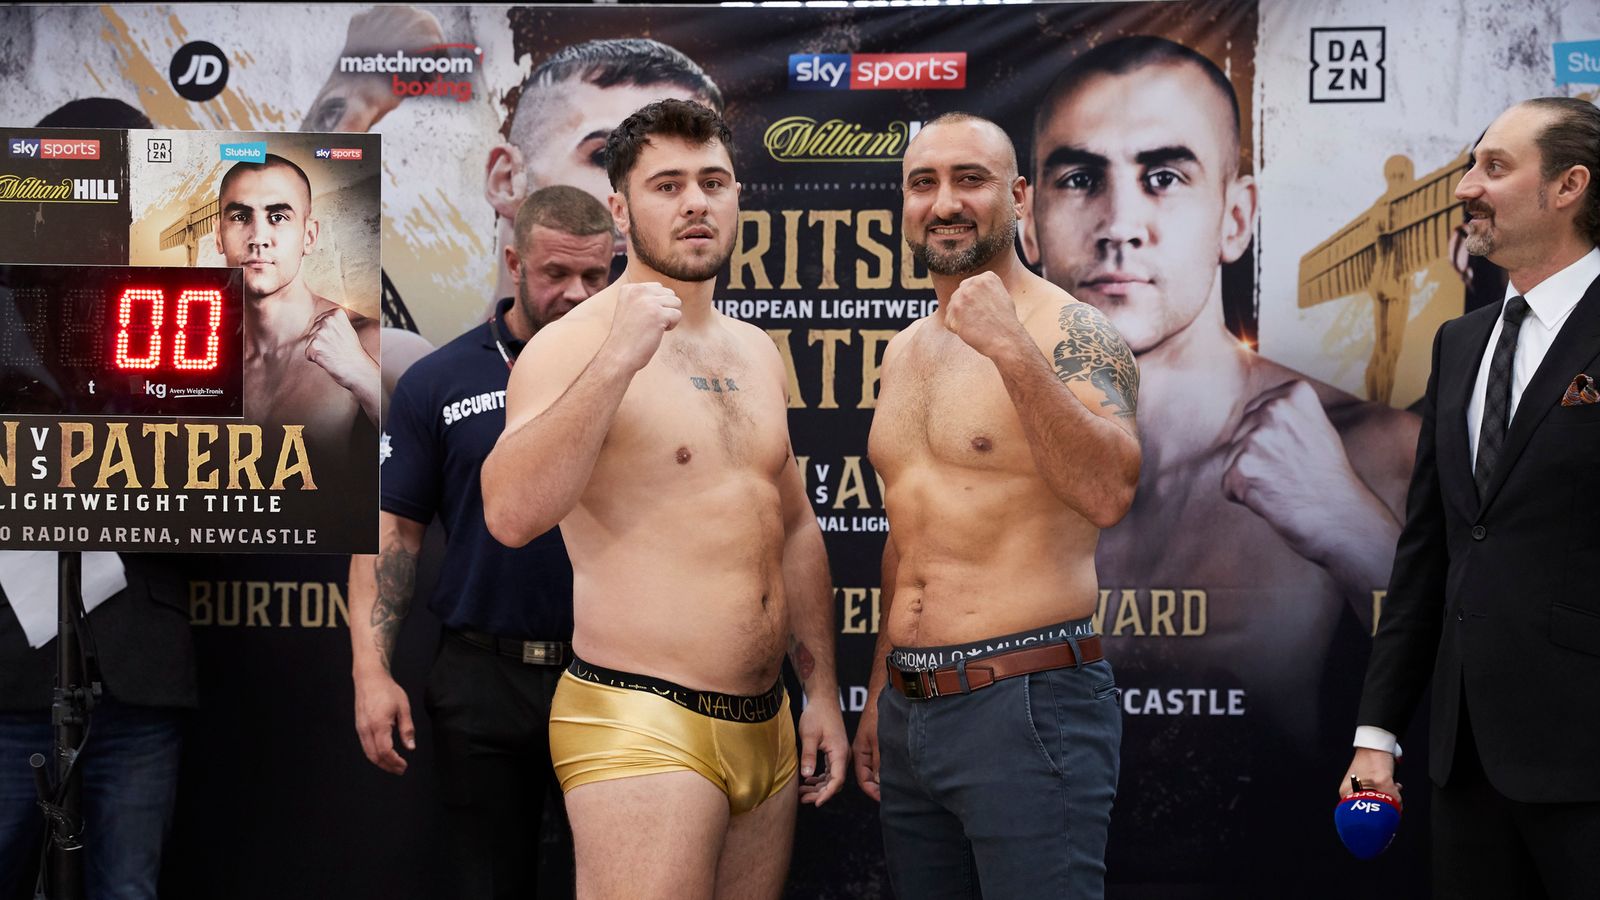 Ritson Vs Patera David Allen Strikes Gold At Newcastle Weigh In Boxing News Sky Sports 